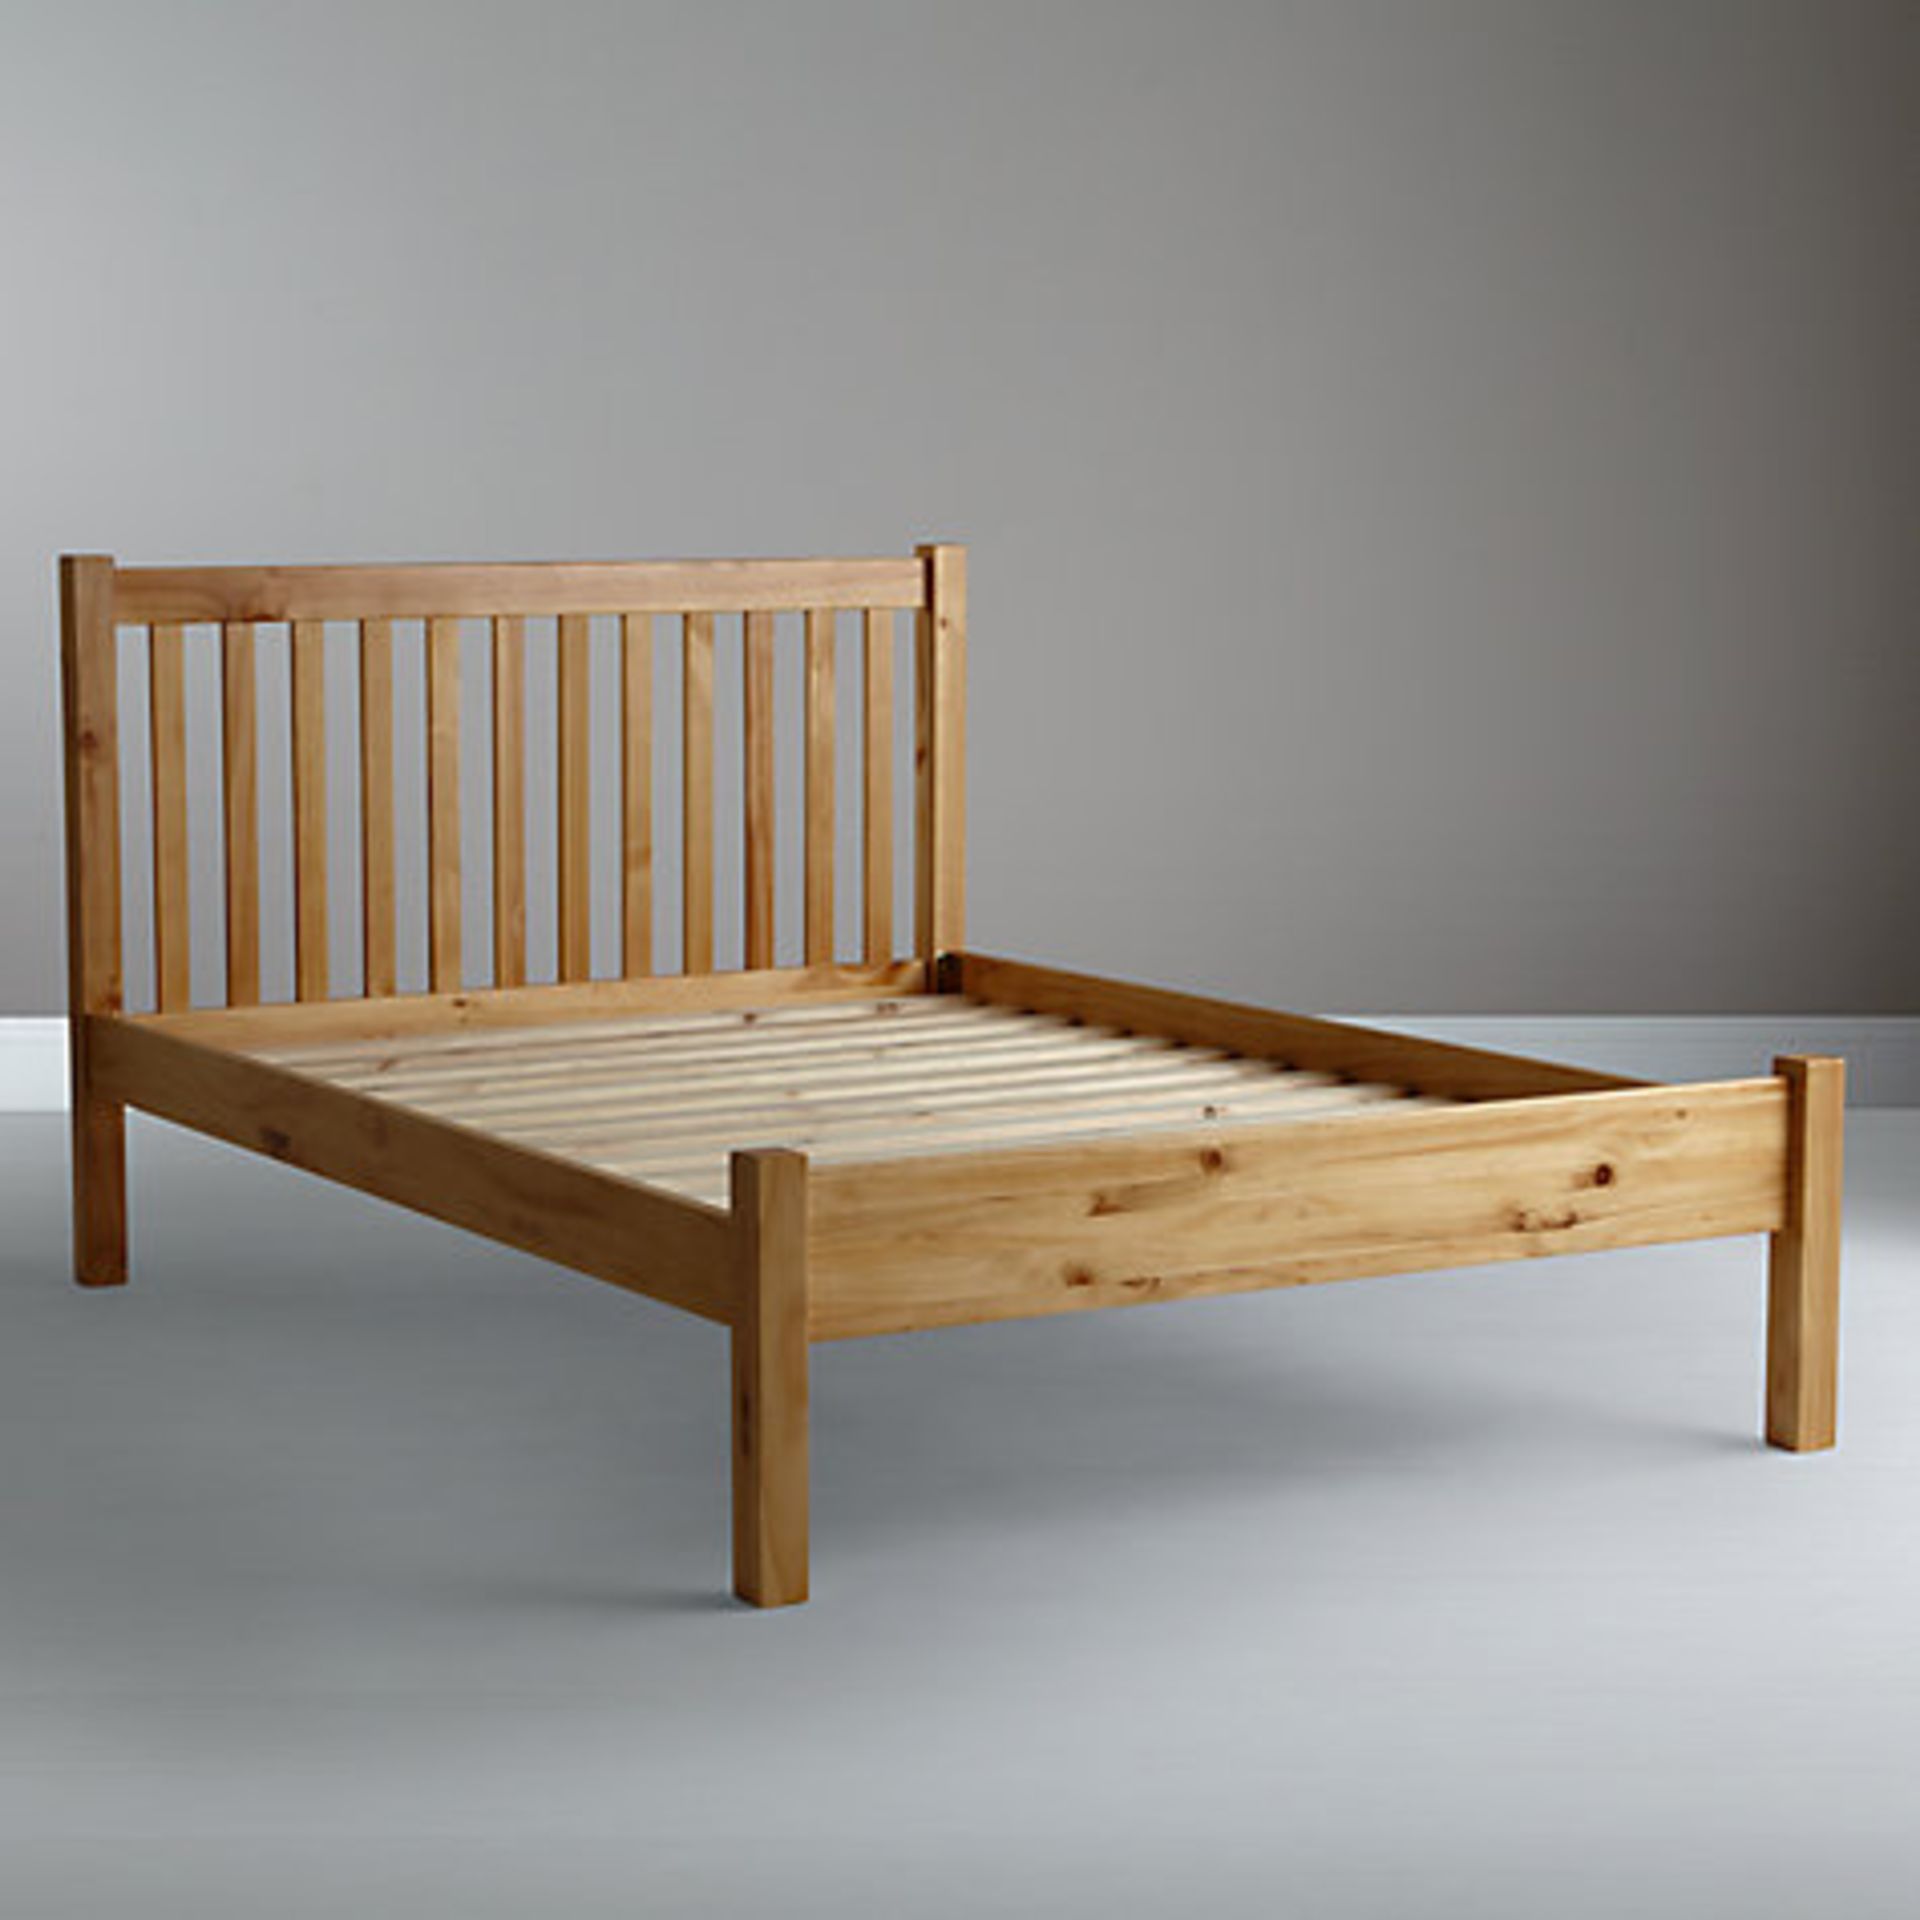 1 x BOXED WILTON 150X200CM BEDSTEAD RRP£200 (7268)  *PLEASE NOTE THAT THE BID PRICE IS MULTIPLIED BY